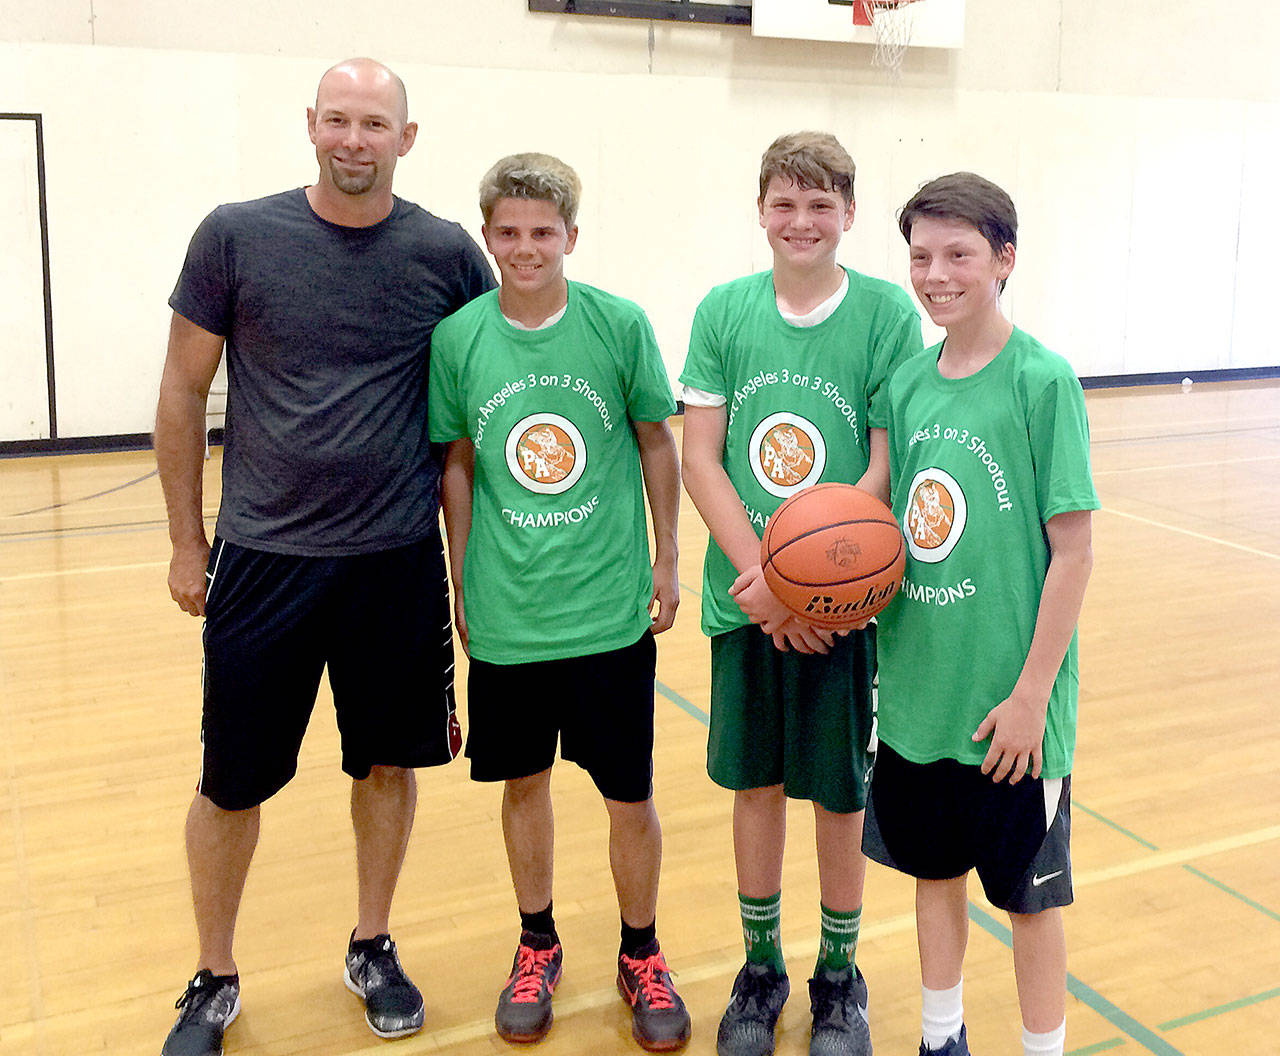 This trio of young hoopsters won the 3-on-3 tournament put on during the Port Angeles High School Basketball Camp. From left are Matt Dunning and players Wyatt Dunning, Xavier Naestes and James Burkhardt.